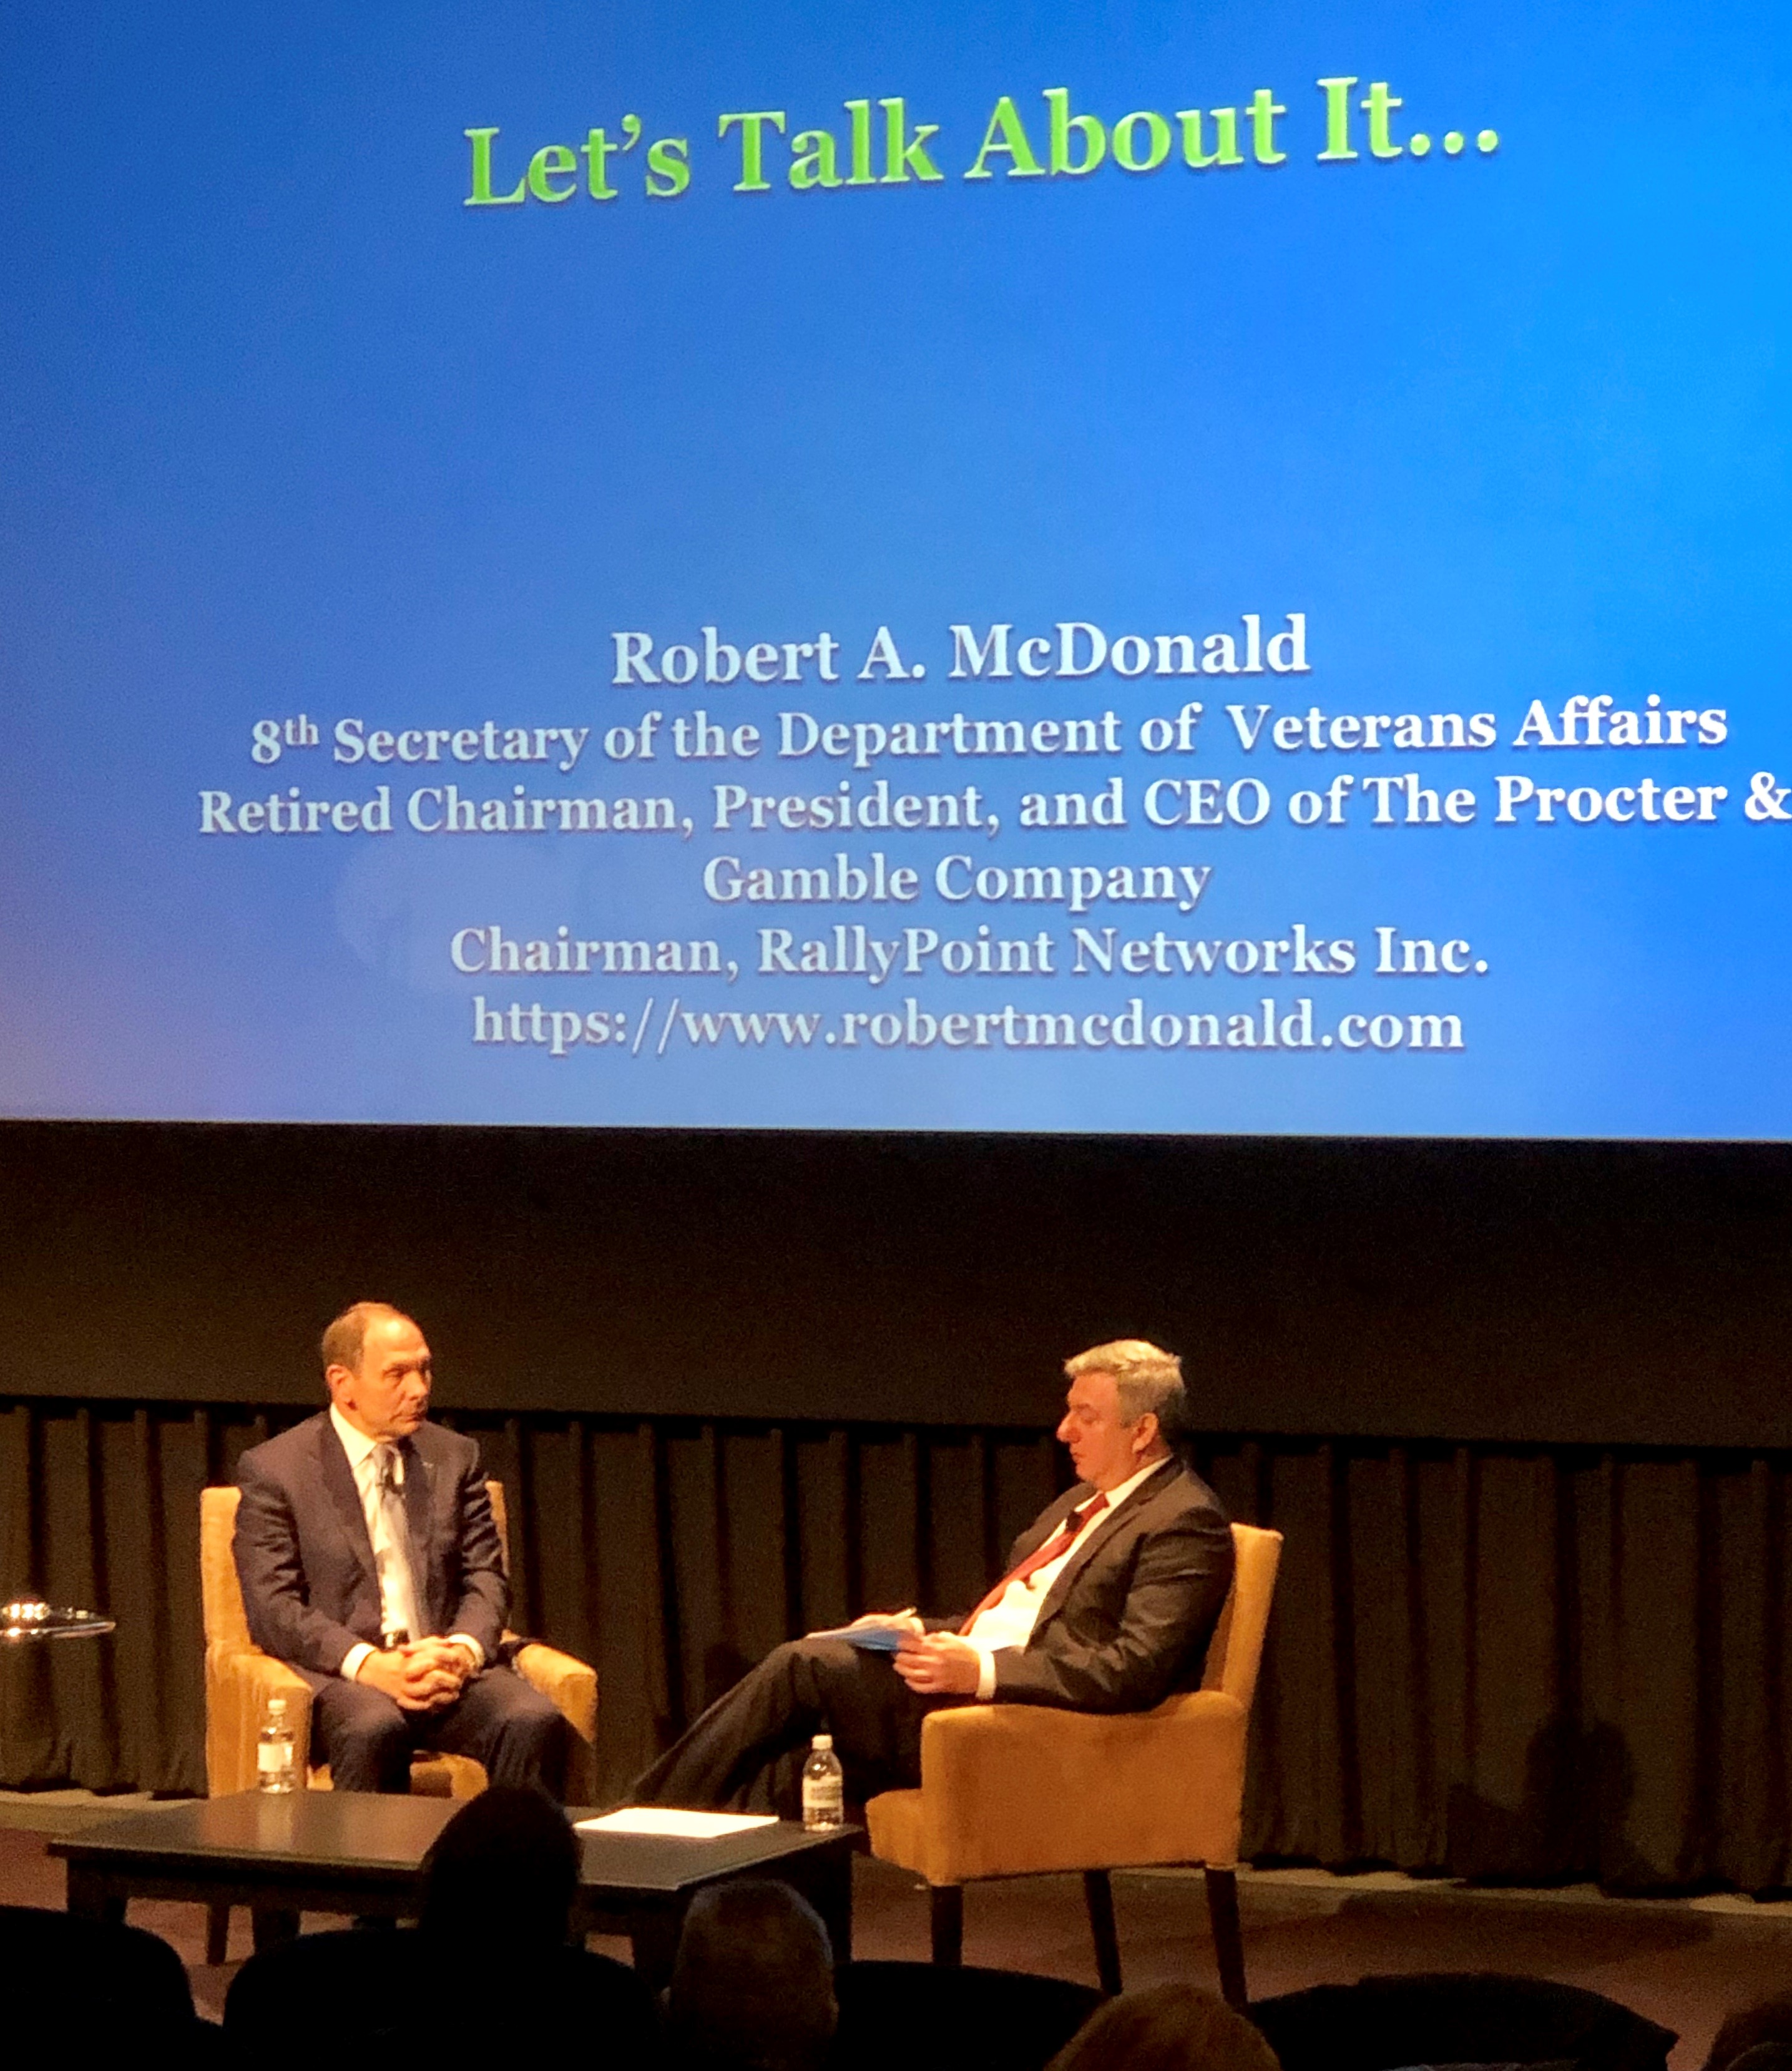 Bob McDonald talks VA and community care during his Q & A session portion of the conference.